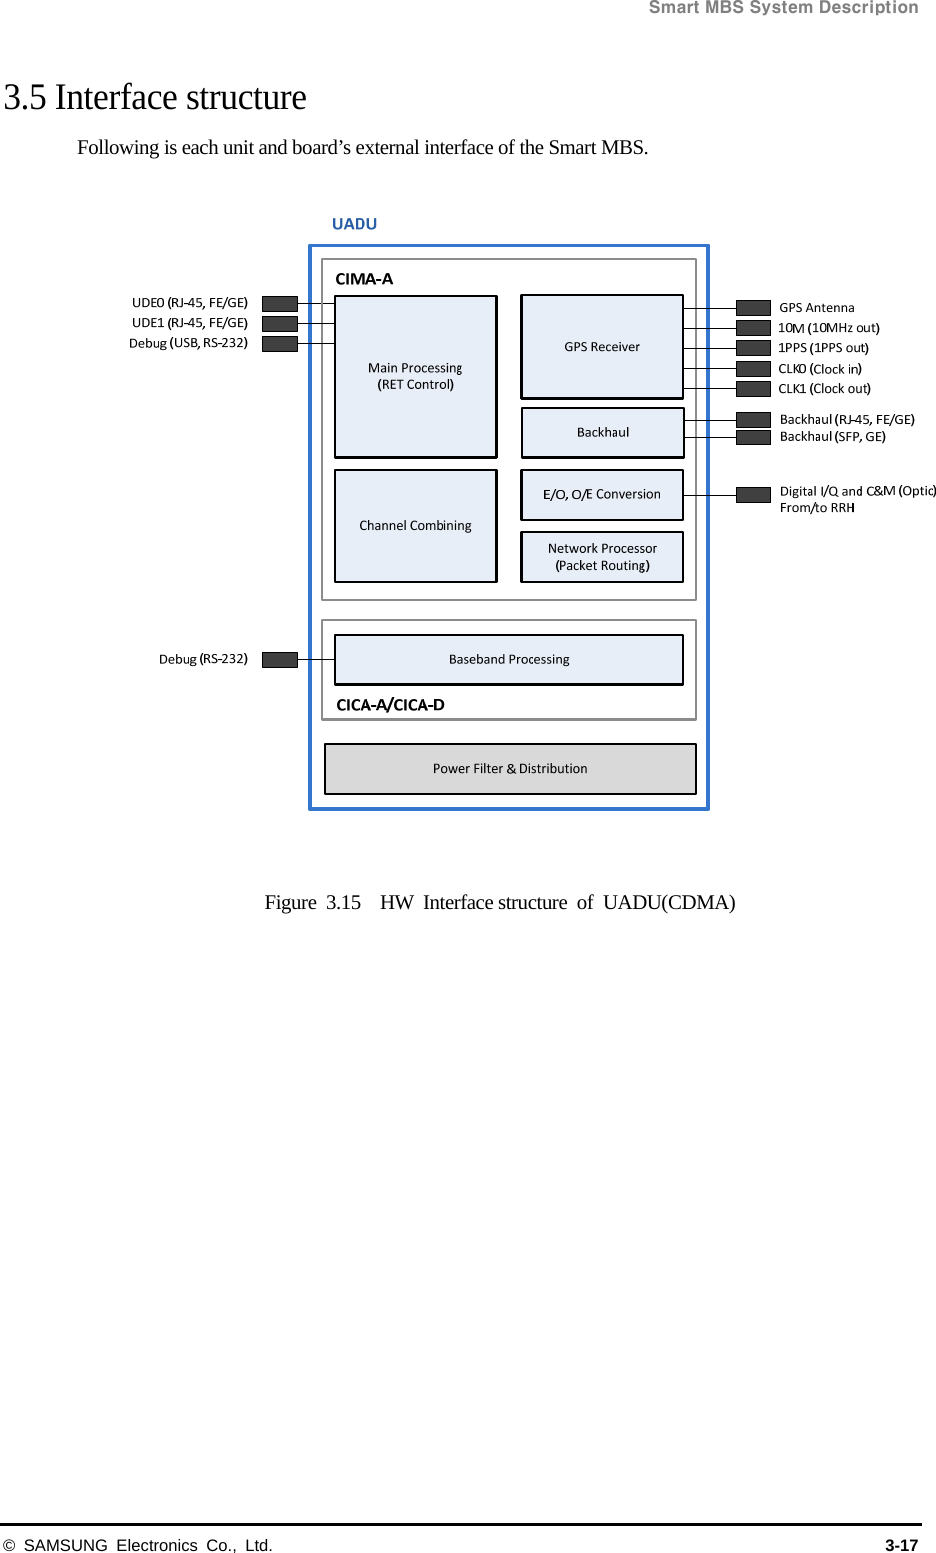  Smart MBS System Description © SAMSUNG Electronics Co., Ltd.  3-17 3.5 Interface structure Following is each unit and board’s external interface of the Smart MBS.   Figure 3.15  HW Interface structure of UADU(CDMA) 